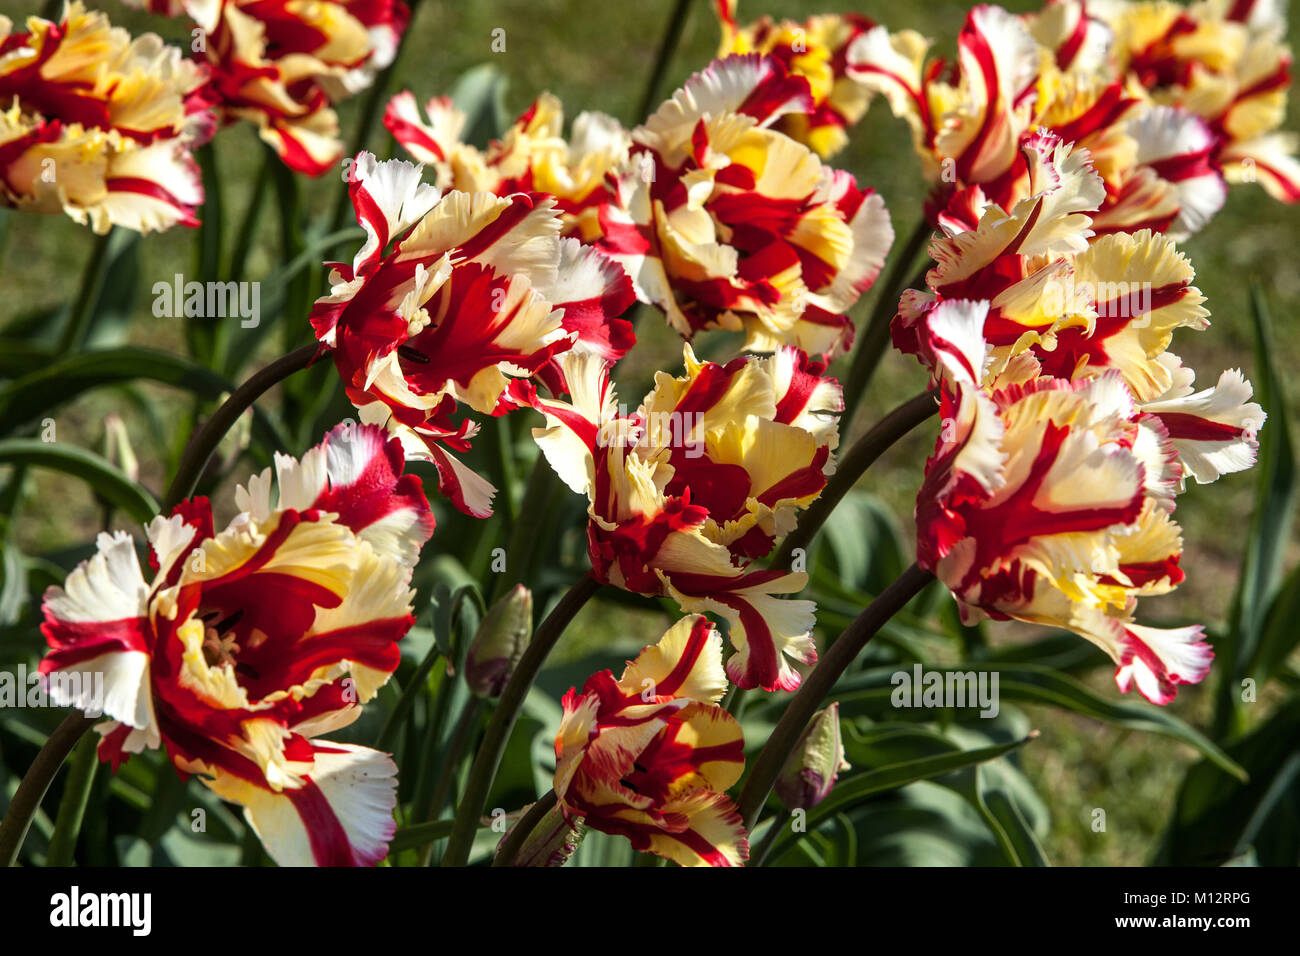 Flower bed full of colorful tulips in garden Tulipa 'Flaming Parrot' Stock Photo